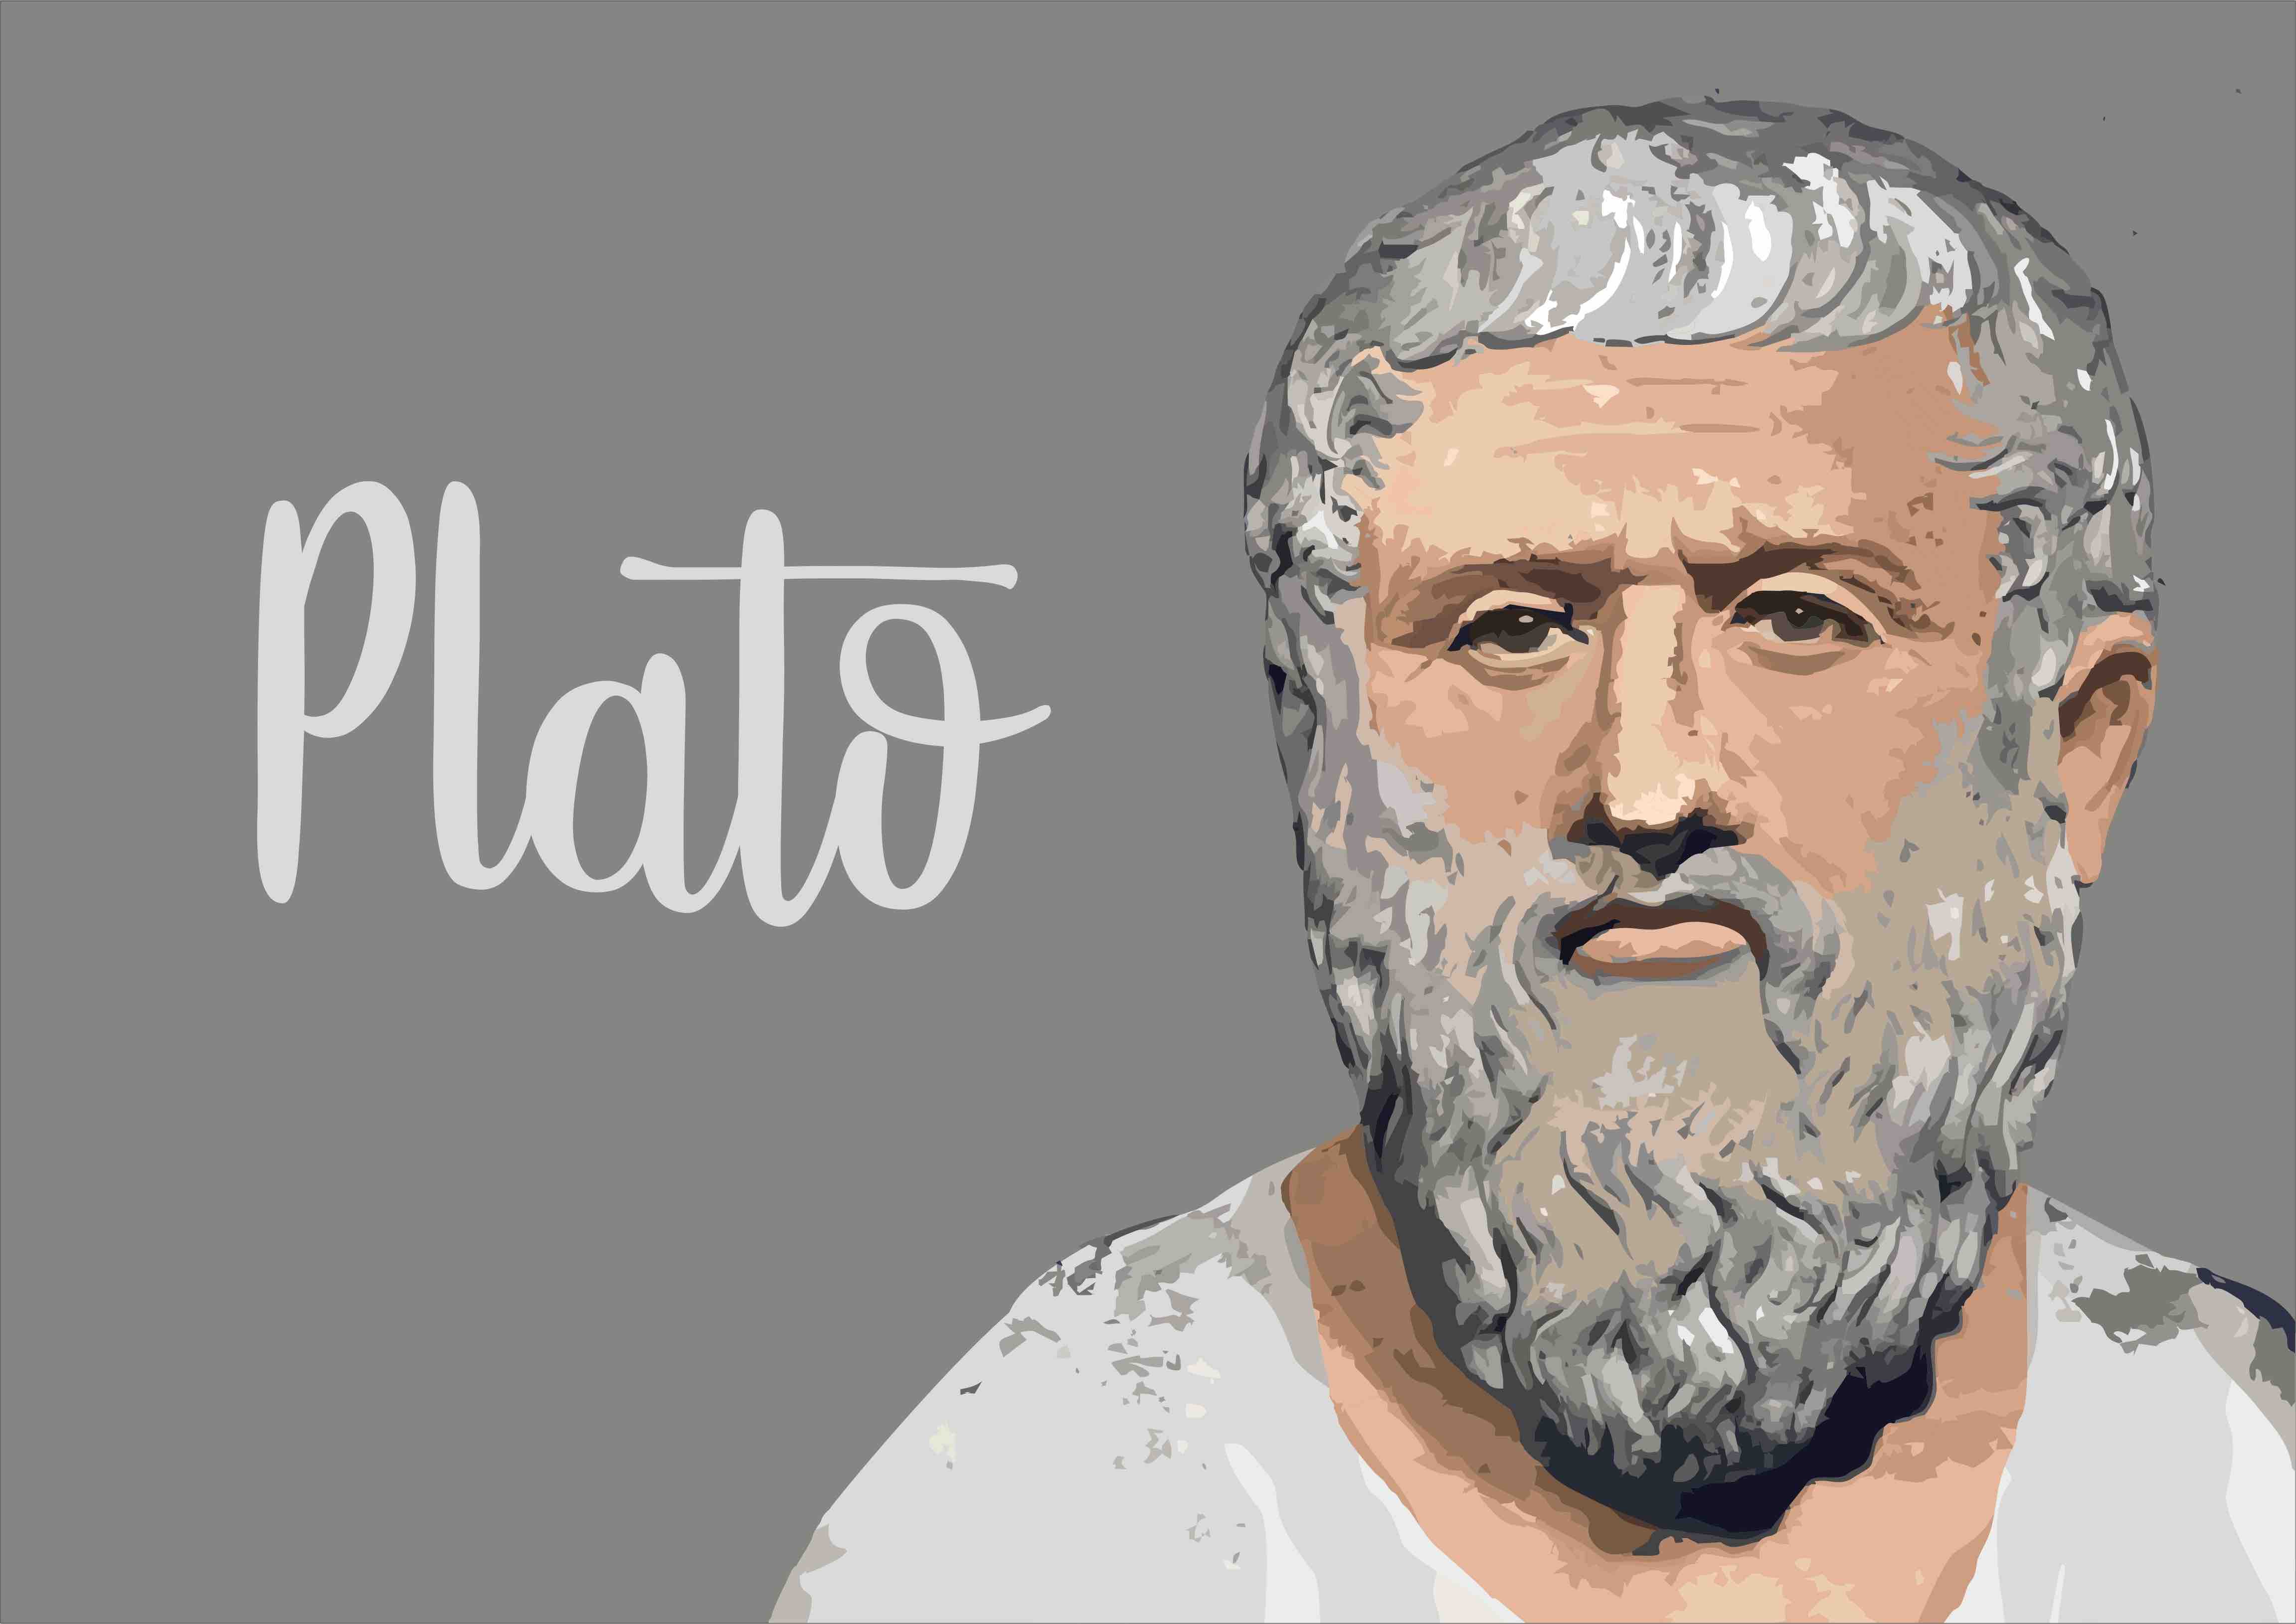 A Primer on Plato: His Life, Works, and Philosophy | The Art of Manliness  The Art of Manliness